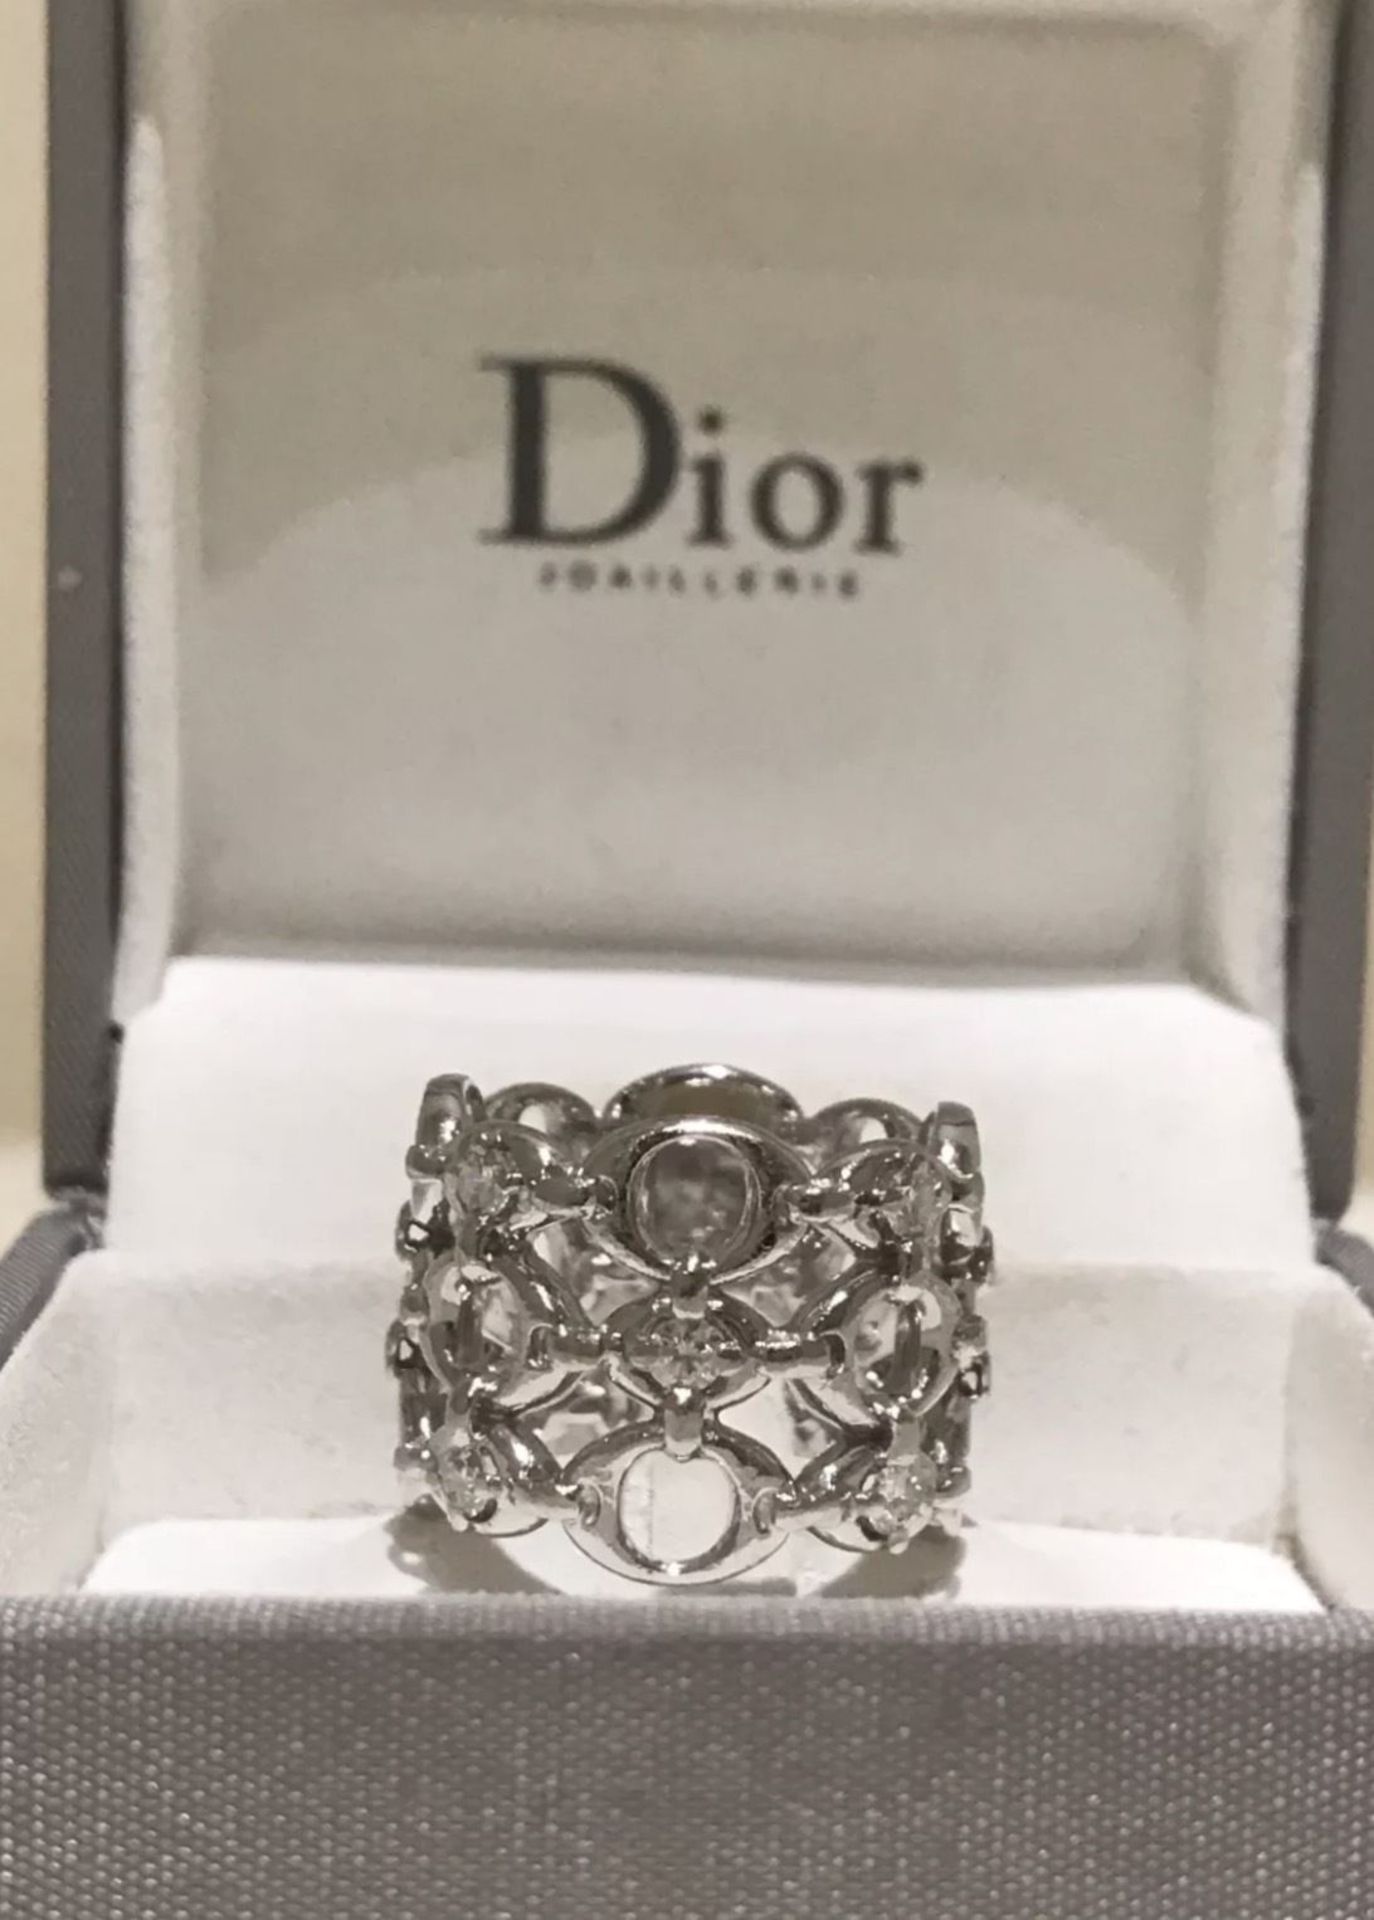 Christian Dior Diamond Ring set in 18 ct White Gold - Image 10 of 12